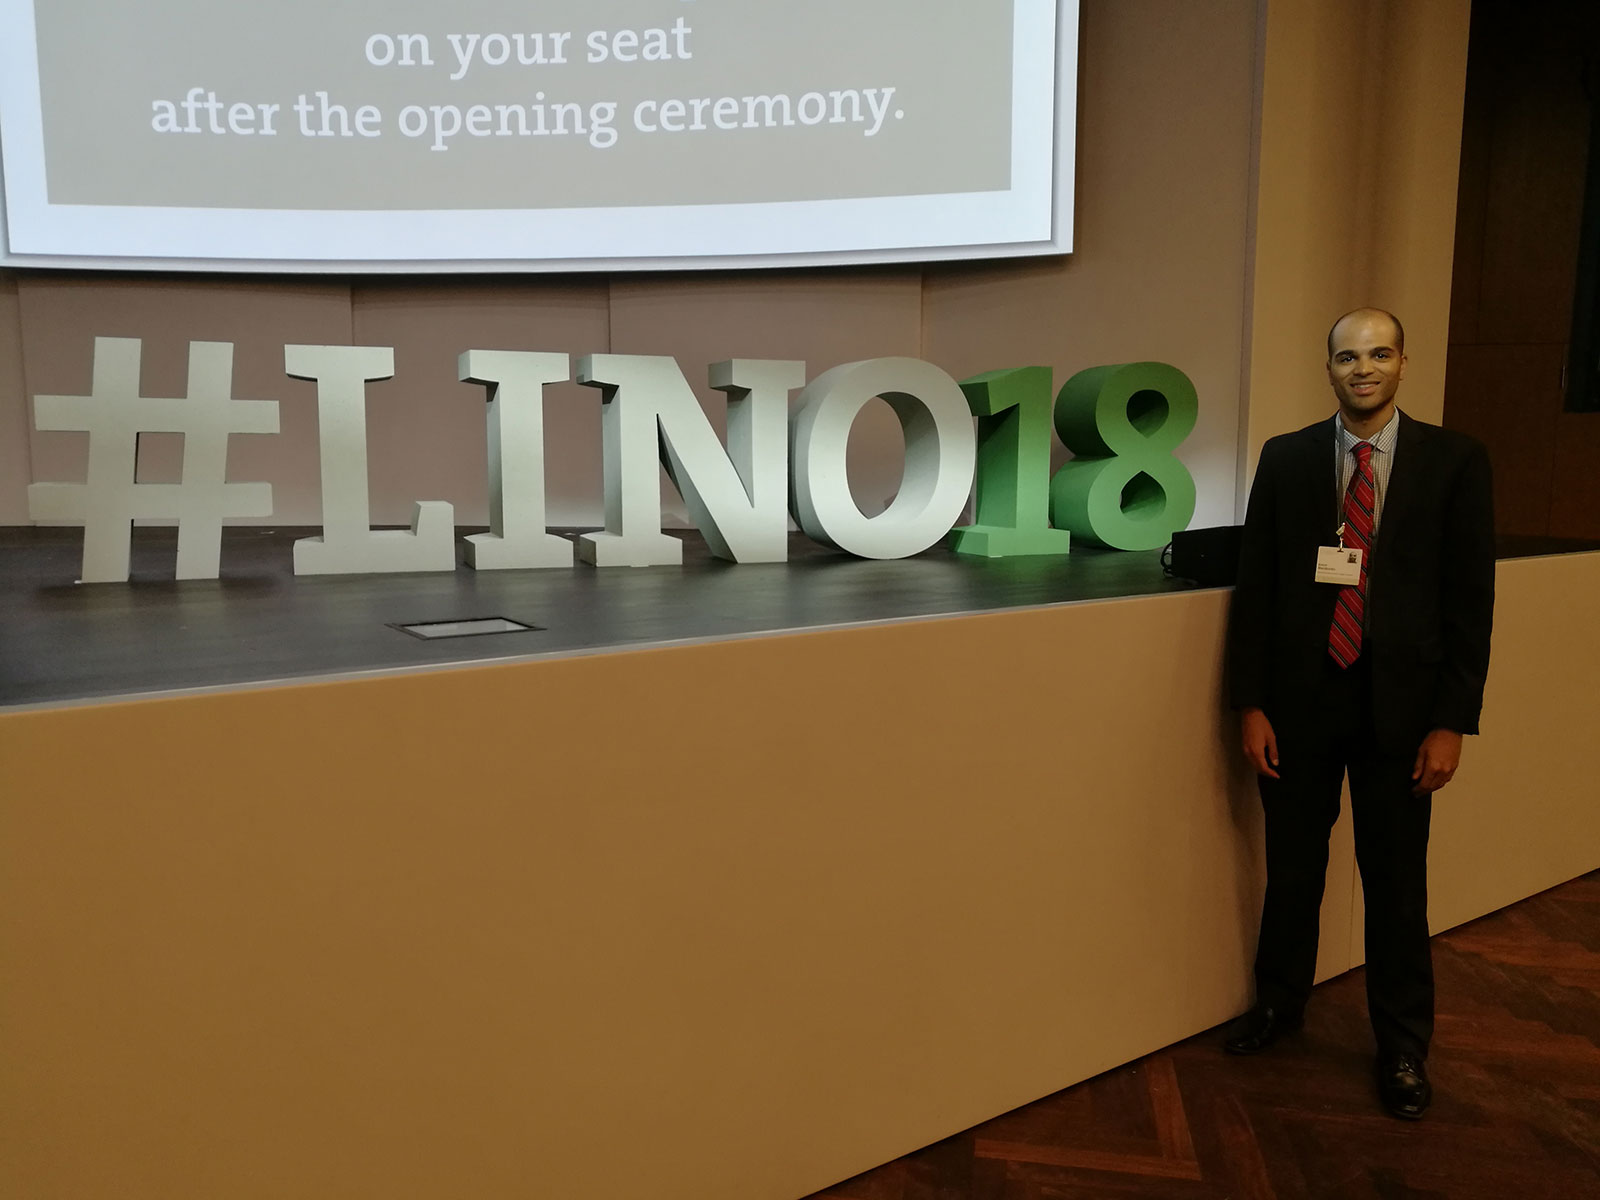 Penn State College of Medicine Biomedical Sciences PhD student Robert Nwokonko traveled to Lindau, Germany, for the 68th Lindau Nobel Laureate Meeting, held June 24 to 29, 2018. Nwokonko is pictured standing in a large space with three-dimensional letters spelling out #LINO18 standing next to him on a wall or ledge.